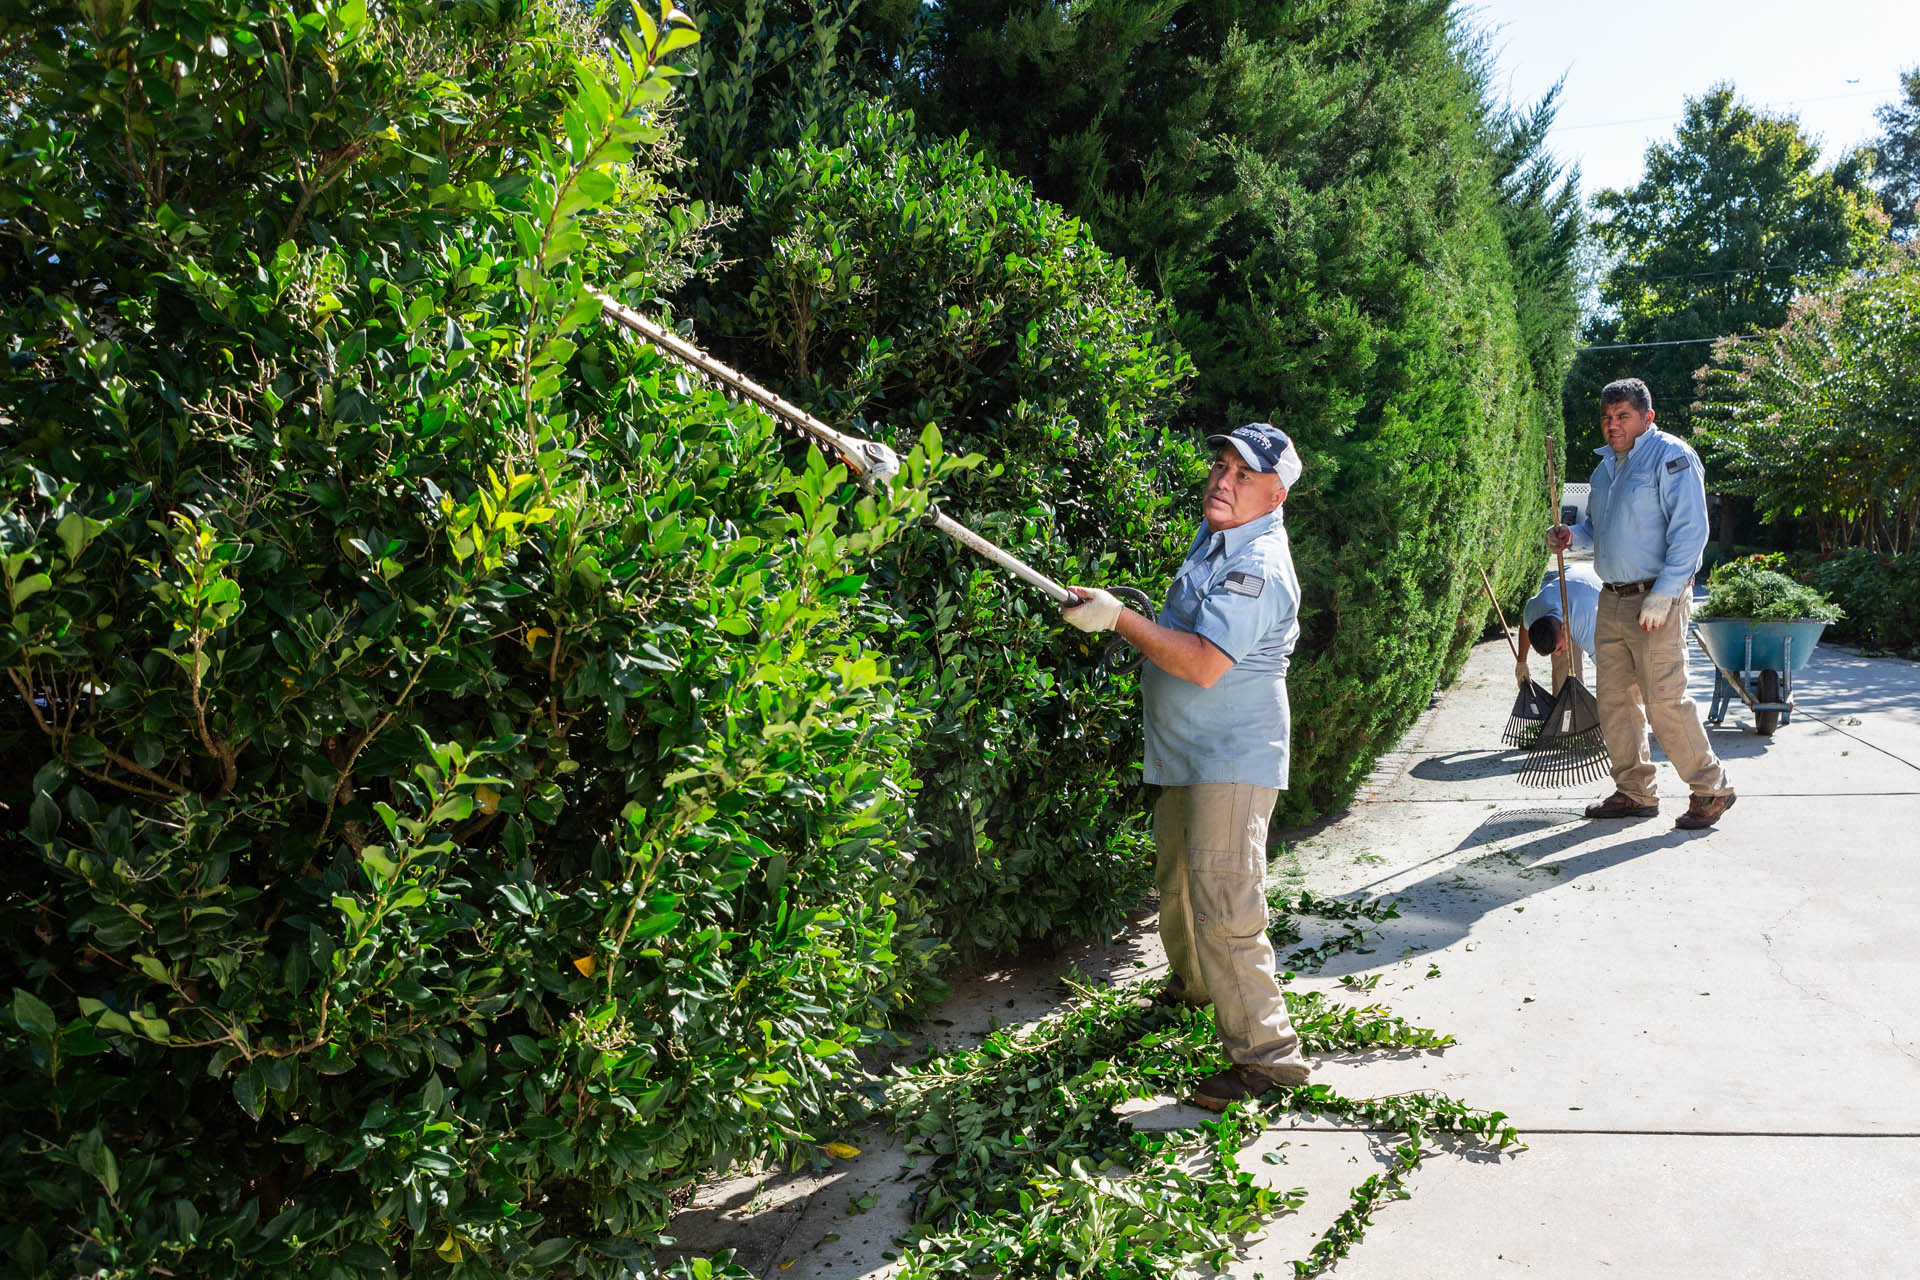 Independence team trimming bushes to highlight services offered.